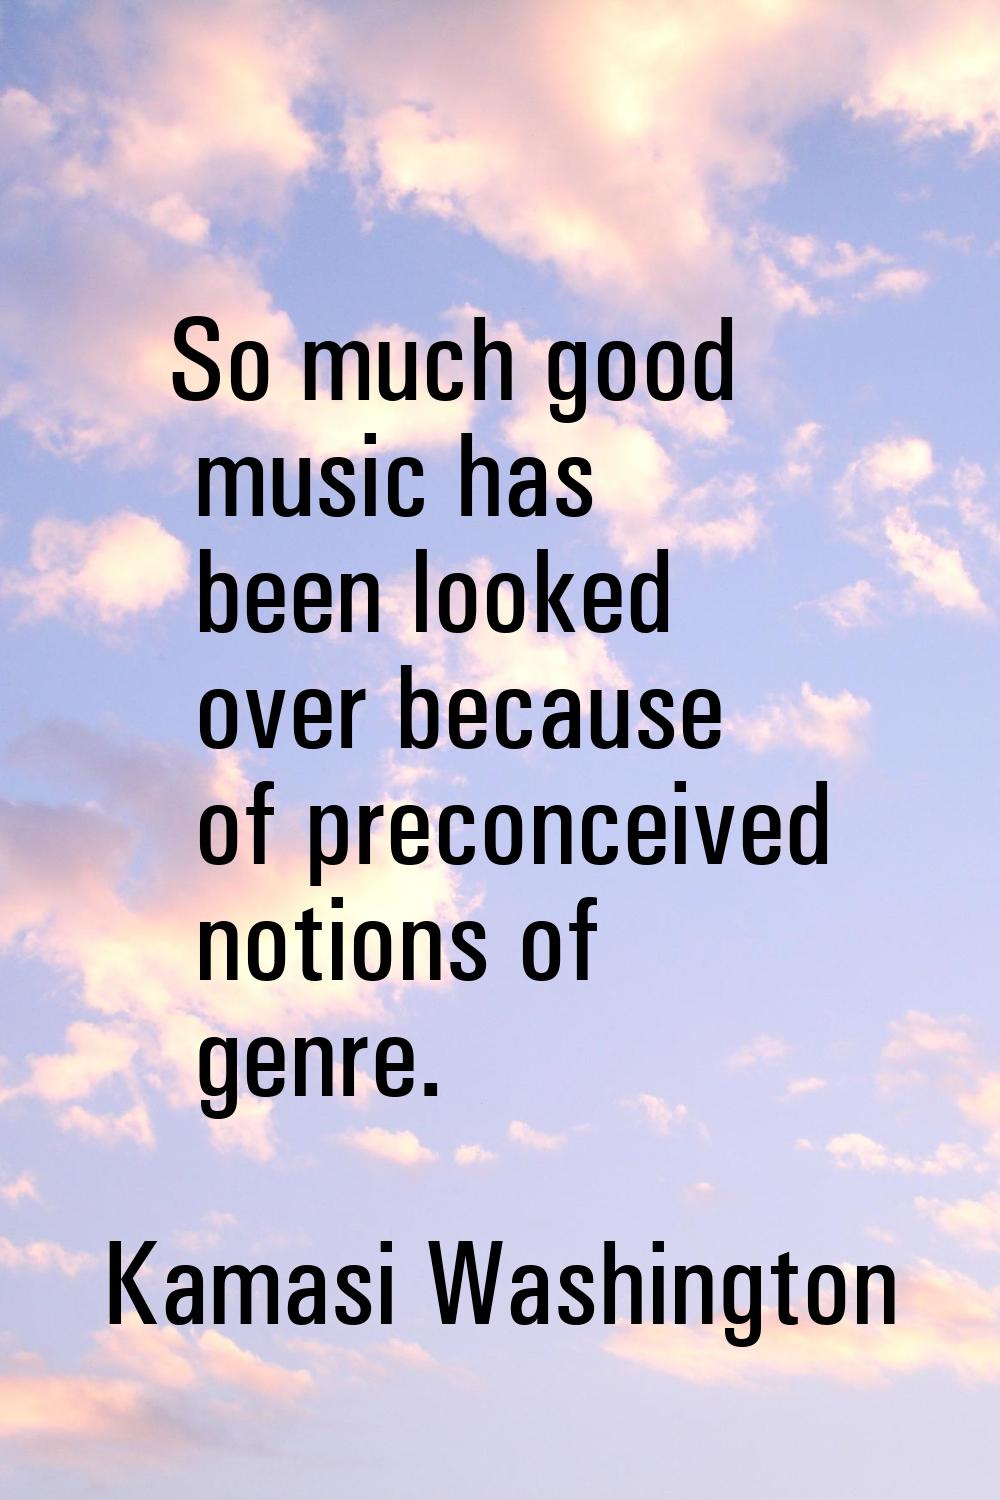 So much good music has been looked over because of preconceived notions of genre.